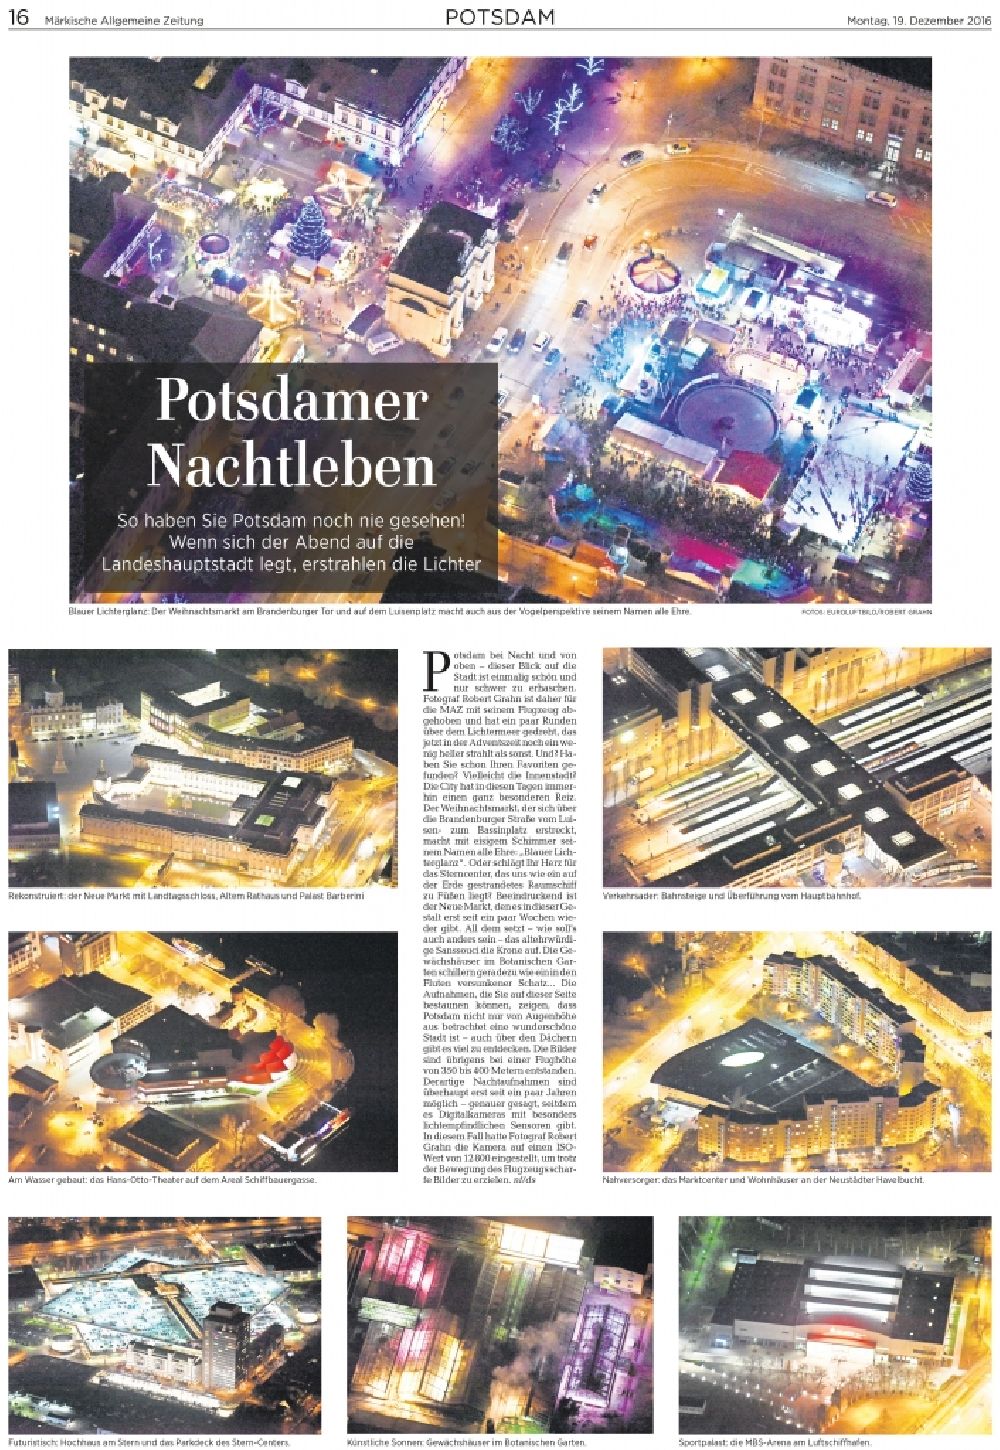 Aerial image at night Potsdam - Picture Section / media use of aerial use in the Newspaper - daily paper MAZ MAeRKISCHE ALLGEMEINE ZEITUNG Page 16 Potsdamer Nachtleben , added to in the district Innenstadt in Potsdam in the state Brandenburg